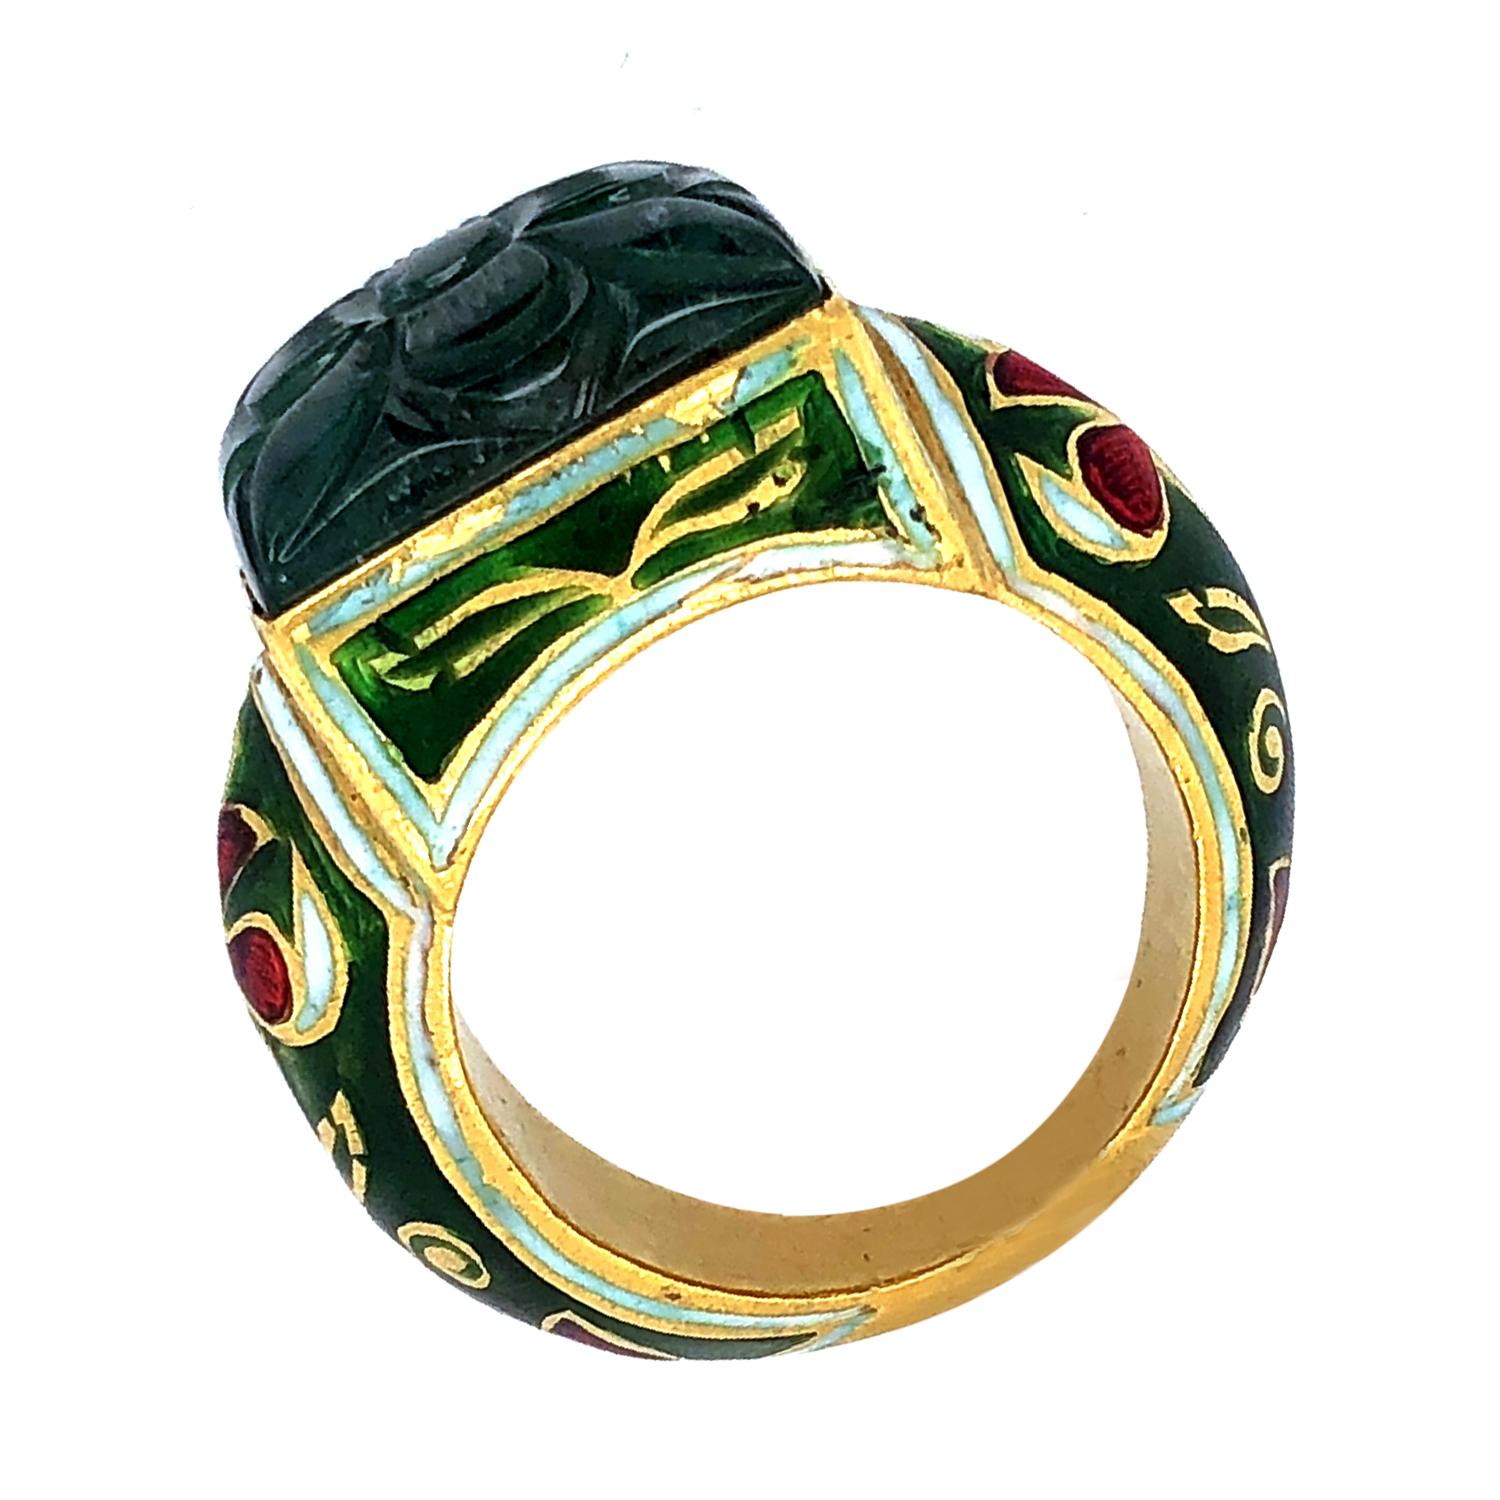 Emerald Cut Carved Emerald Ring With Enamel Floral Motif Made In 22k Gold